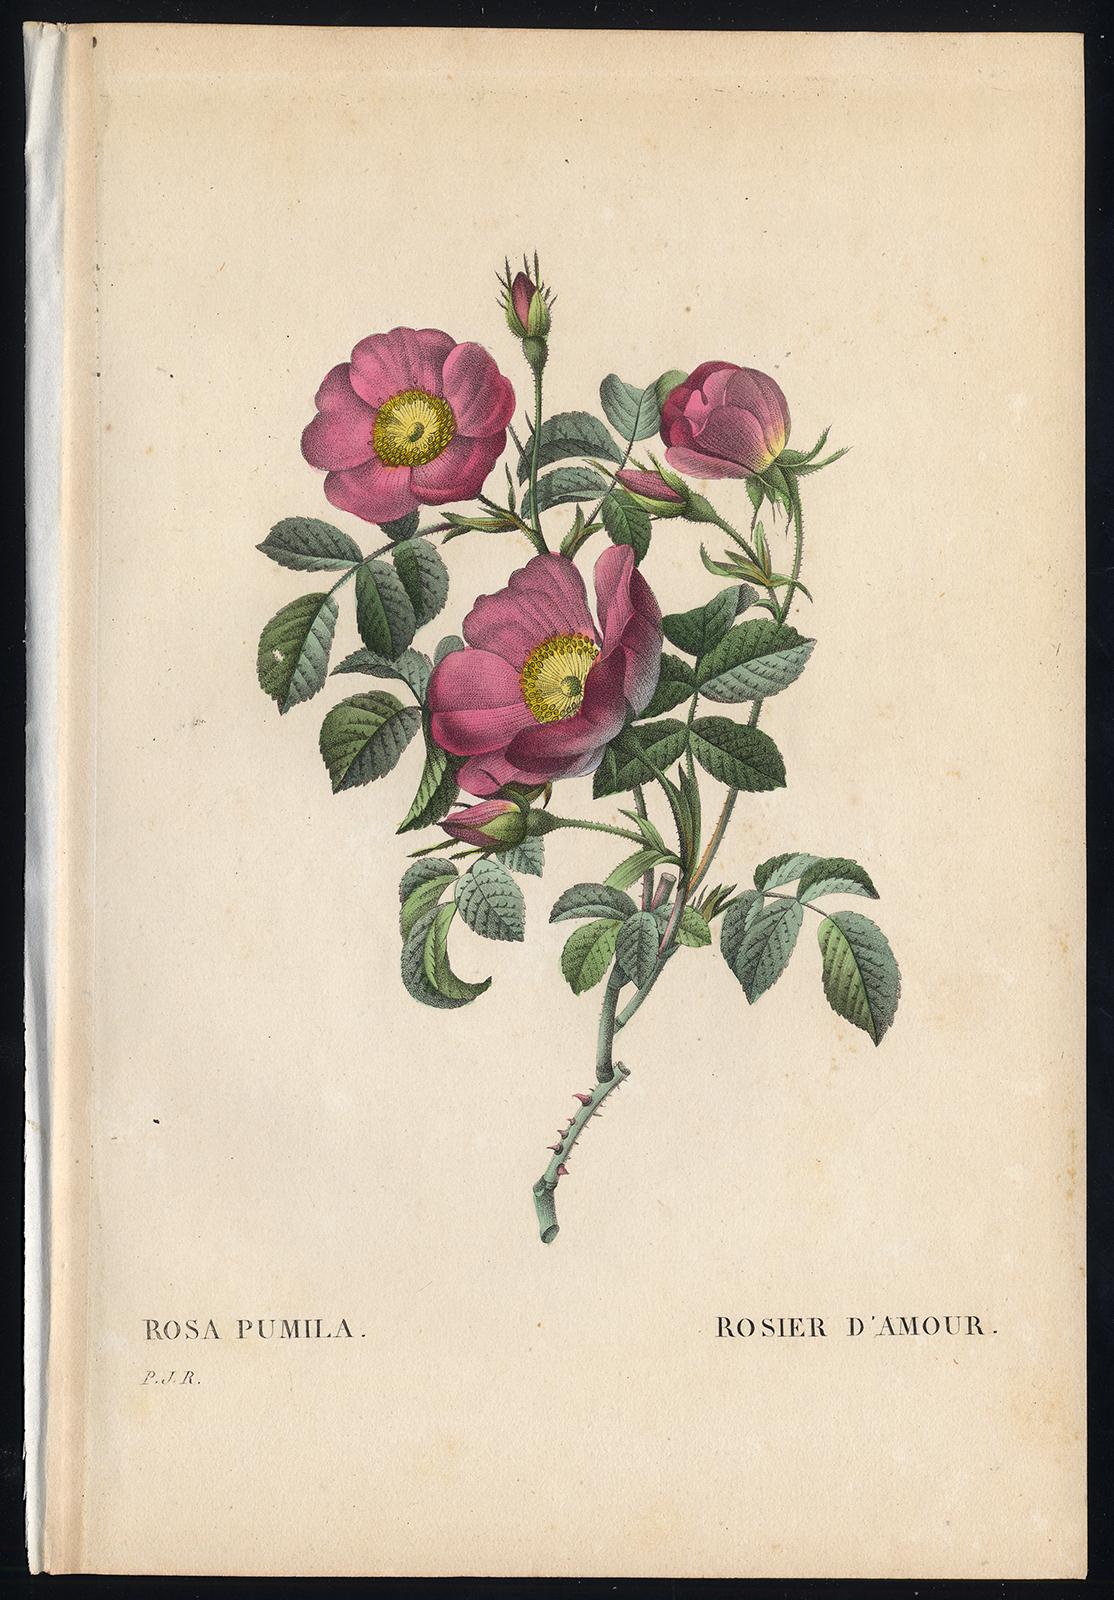 Pierre-Joseph Redouté Print - Creeping French Rose by Redoute - Handcoloured engraving - 19th century